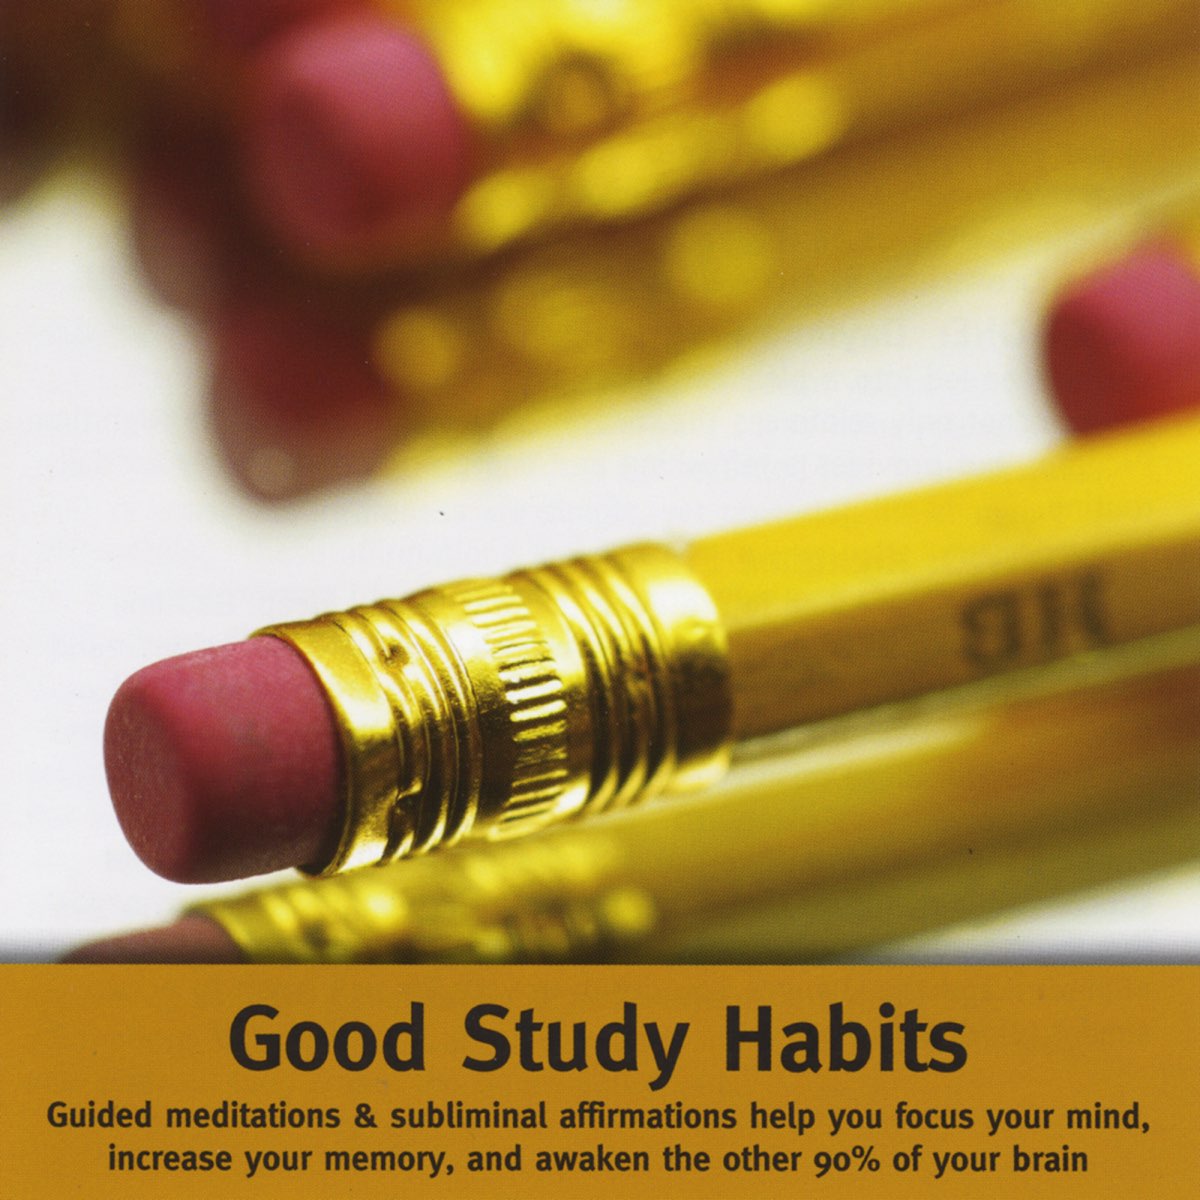 You can study good